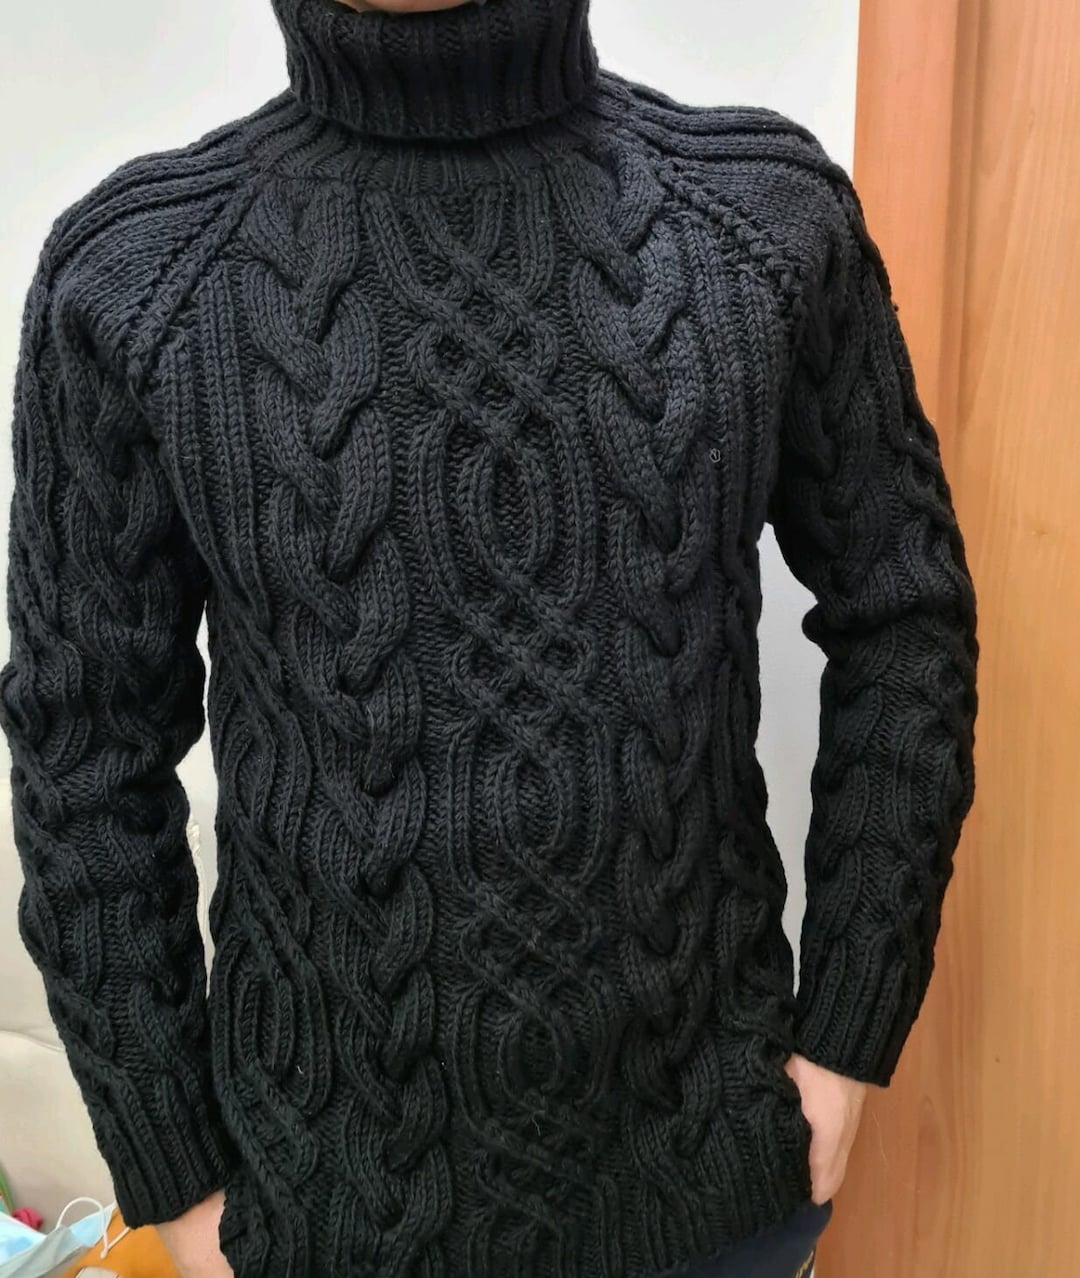 Knit Pullover for Men, Cable Knit Thick Men Sweater, Chunky Knit Aran ...